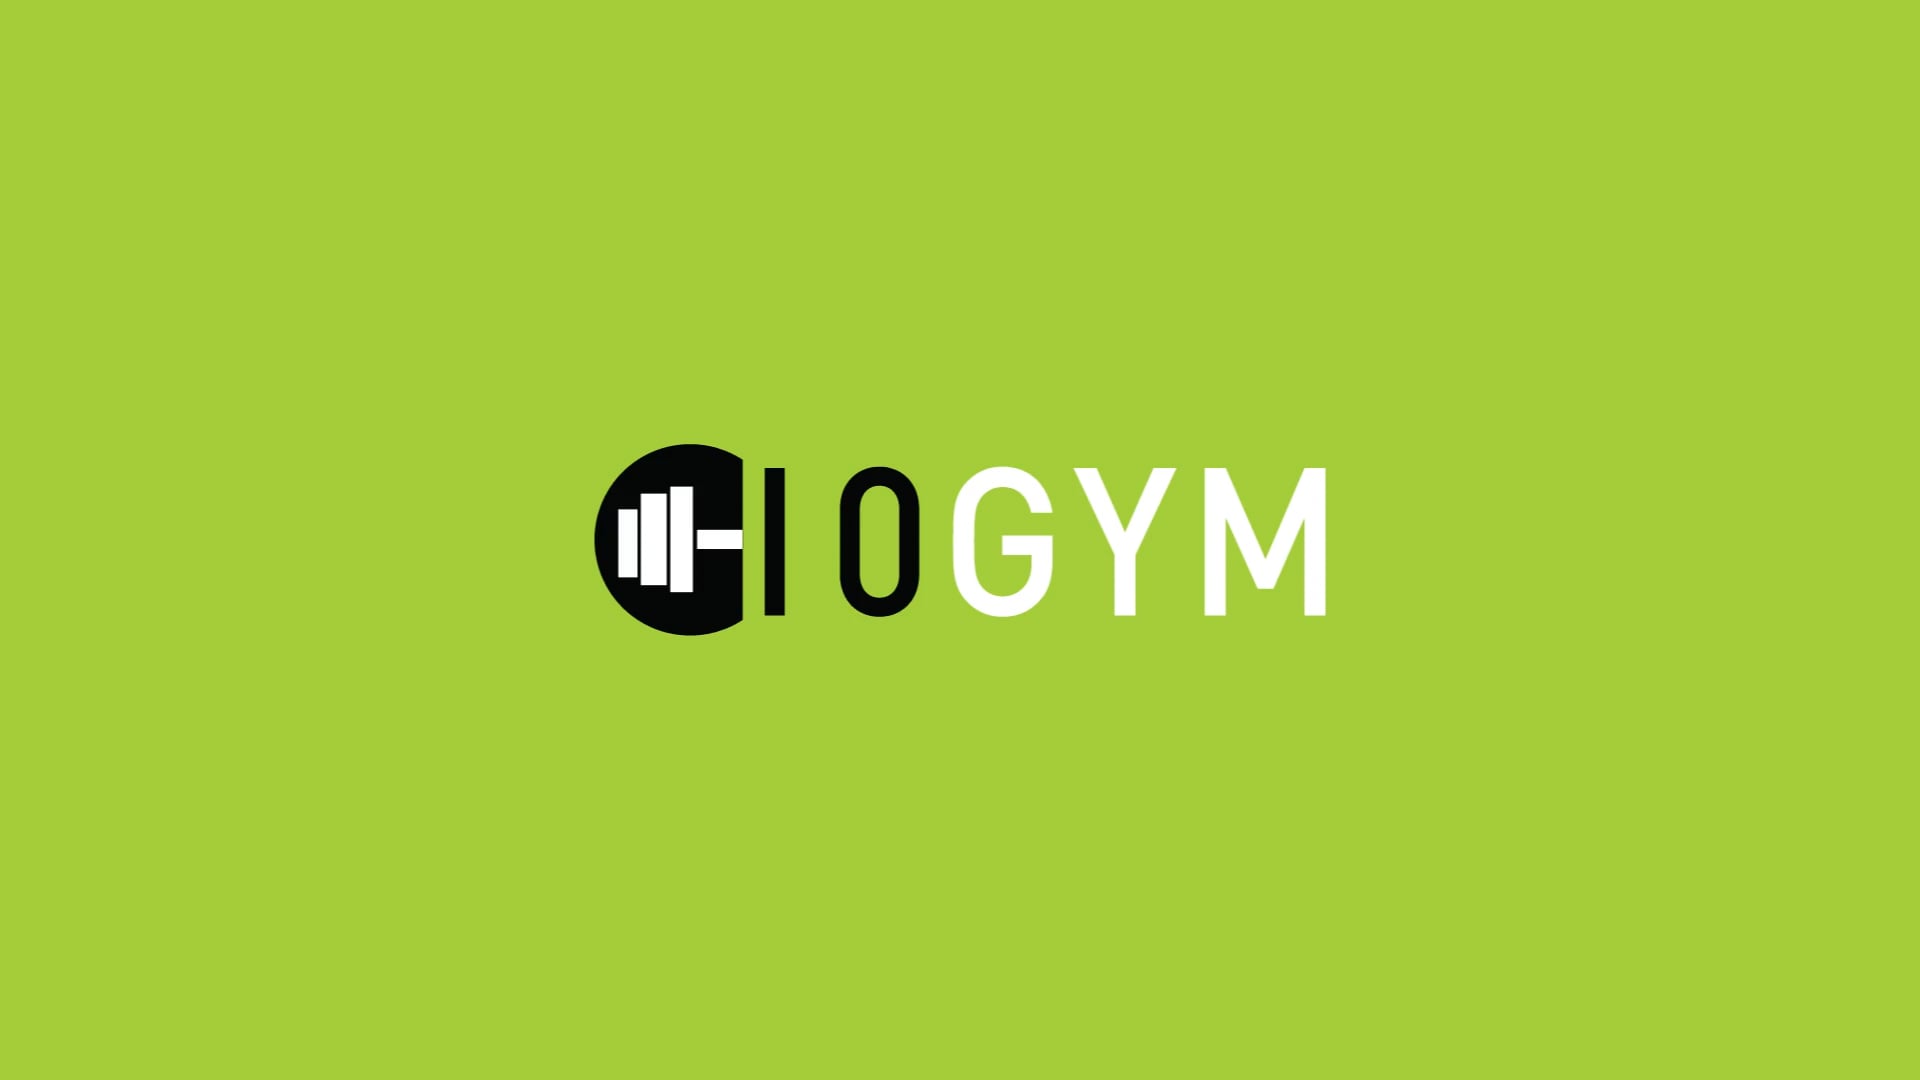 Video Business Card | 10 Gym